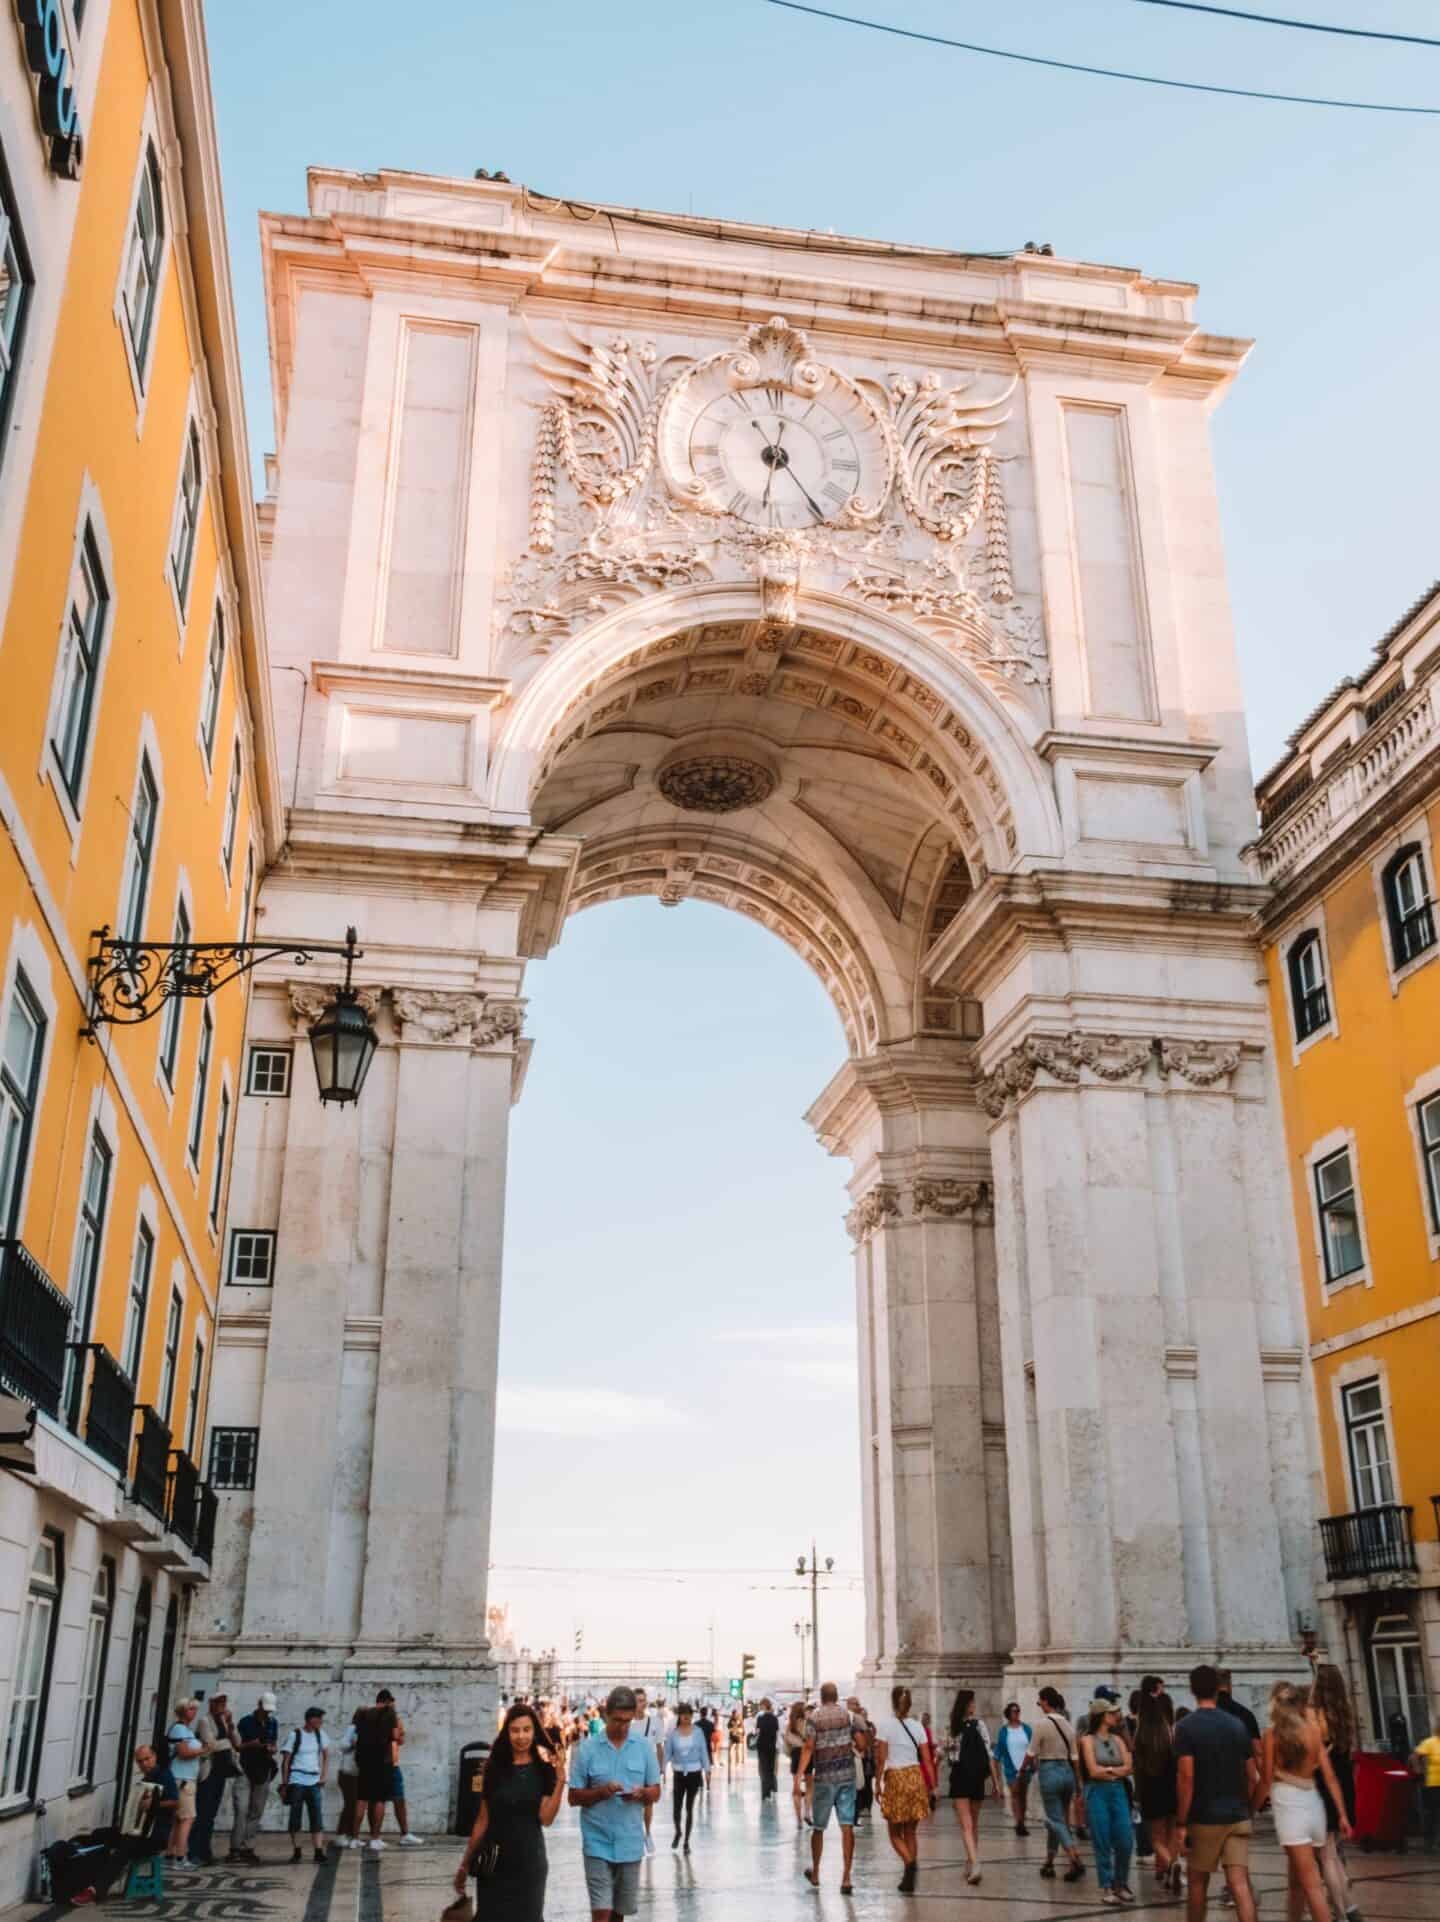 The Arco da Rua Augusta in Lisbon is well-worth a visit on your 5 days in Lisbon itinerary. 